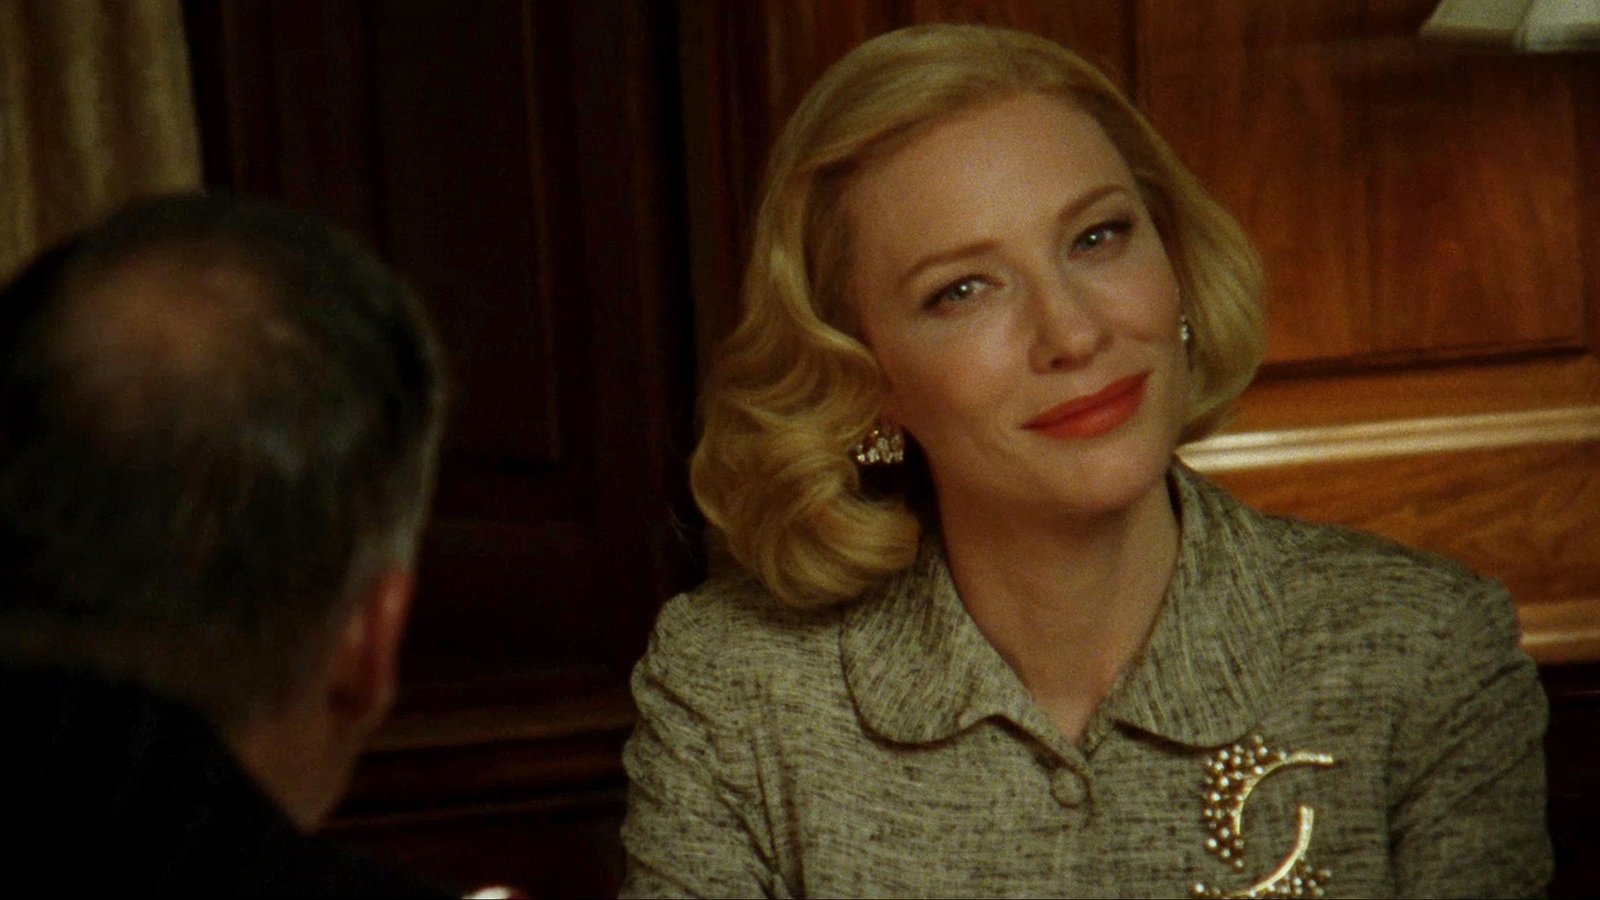 Is Carol by Todd Haynes the greatest LGBT movie ever?